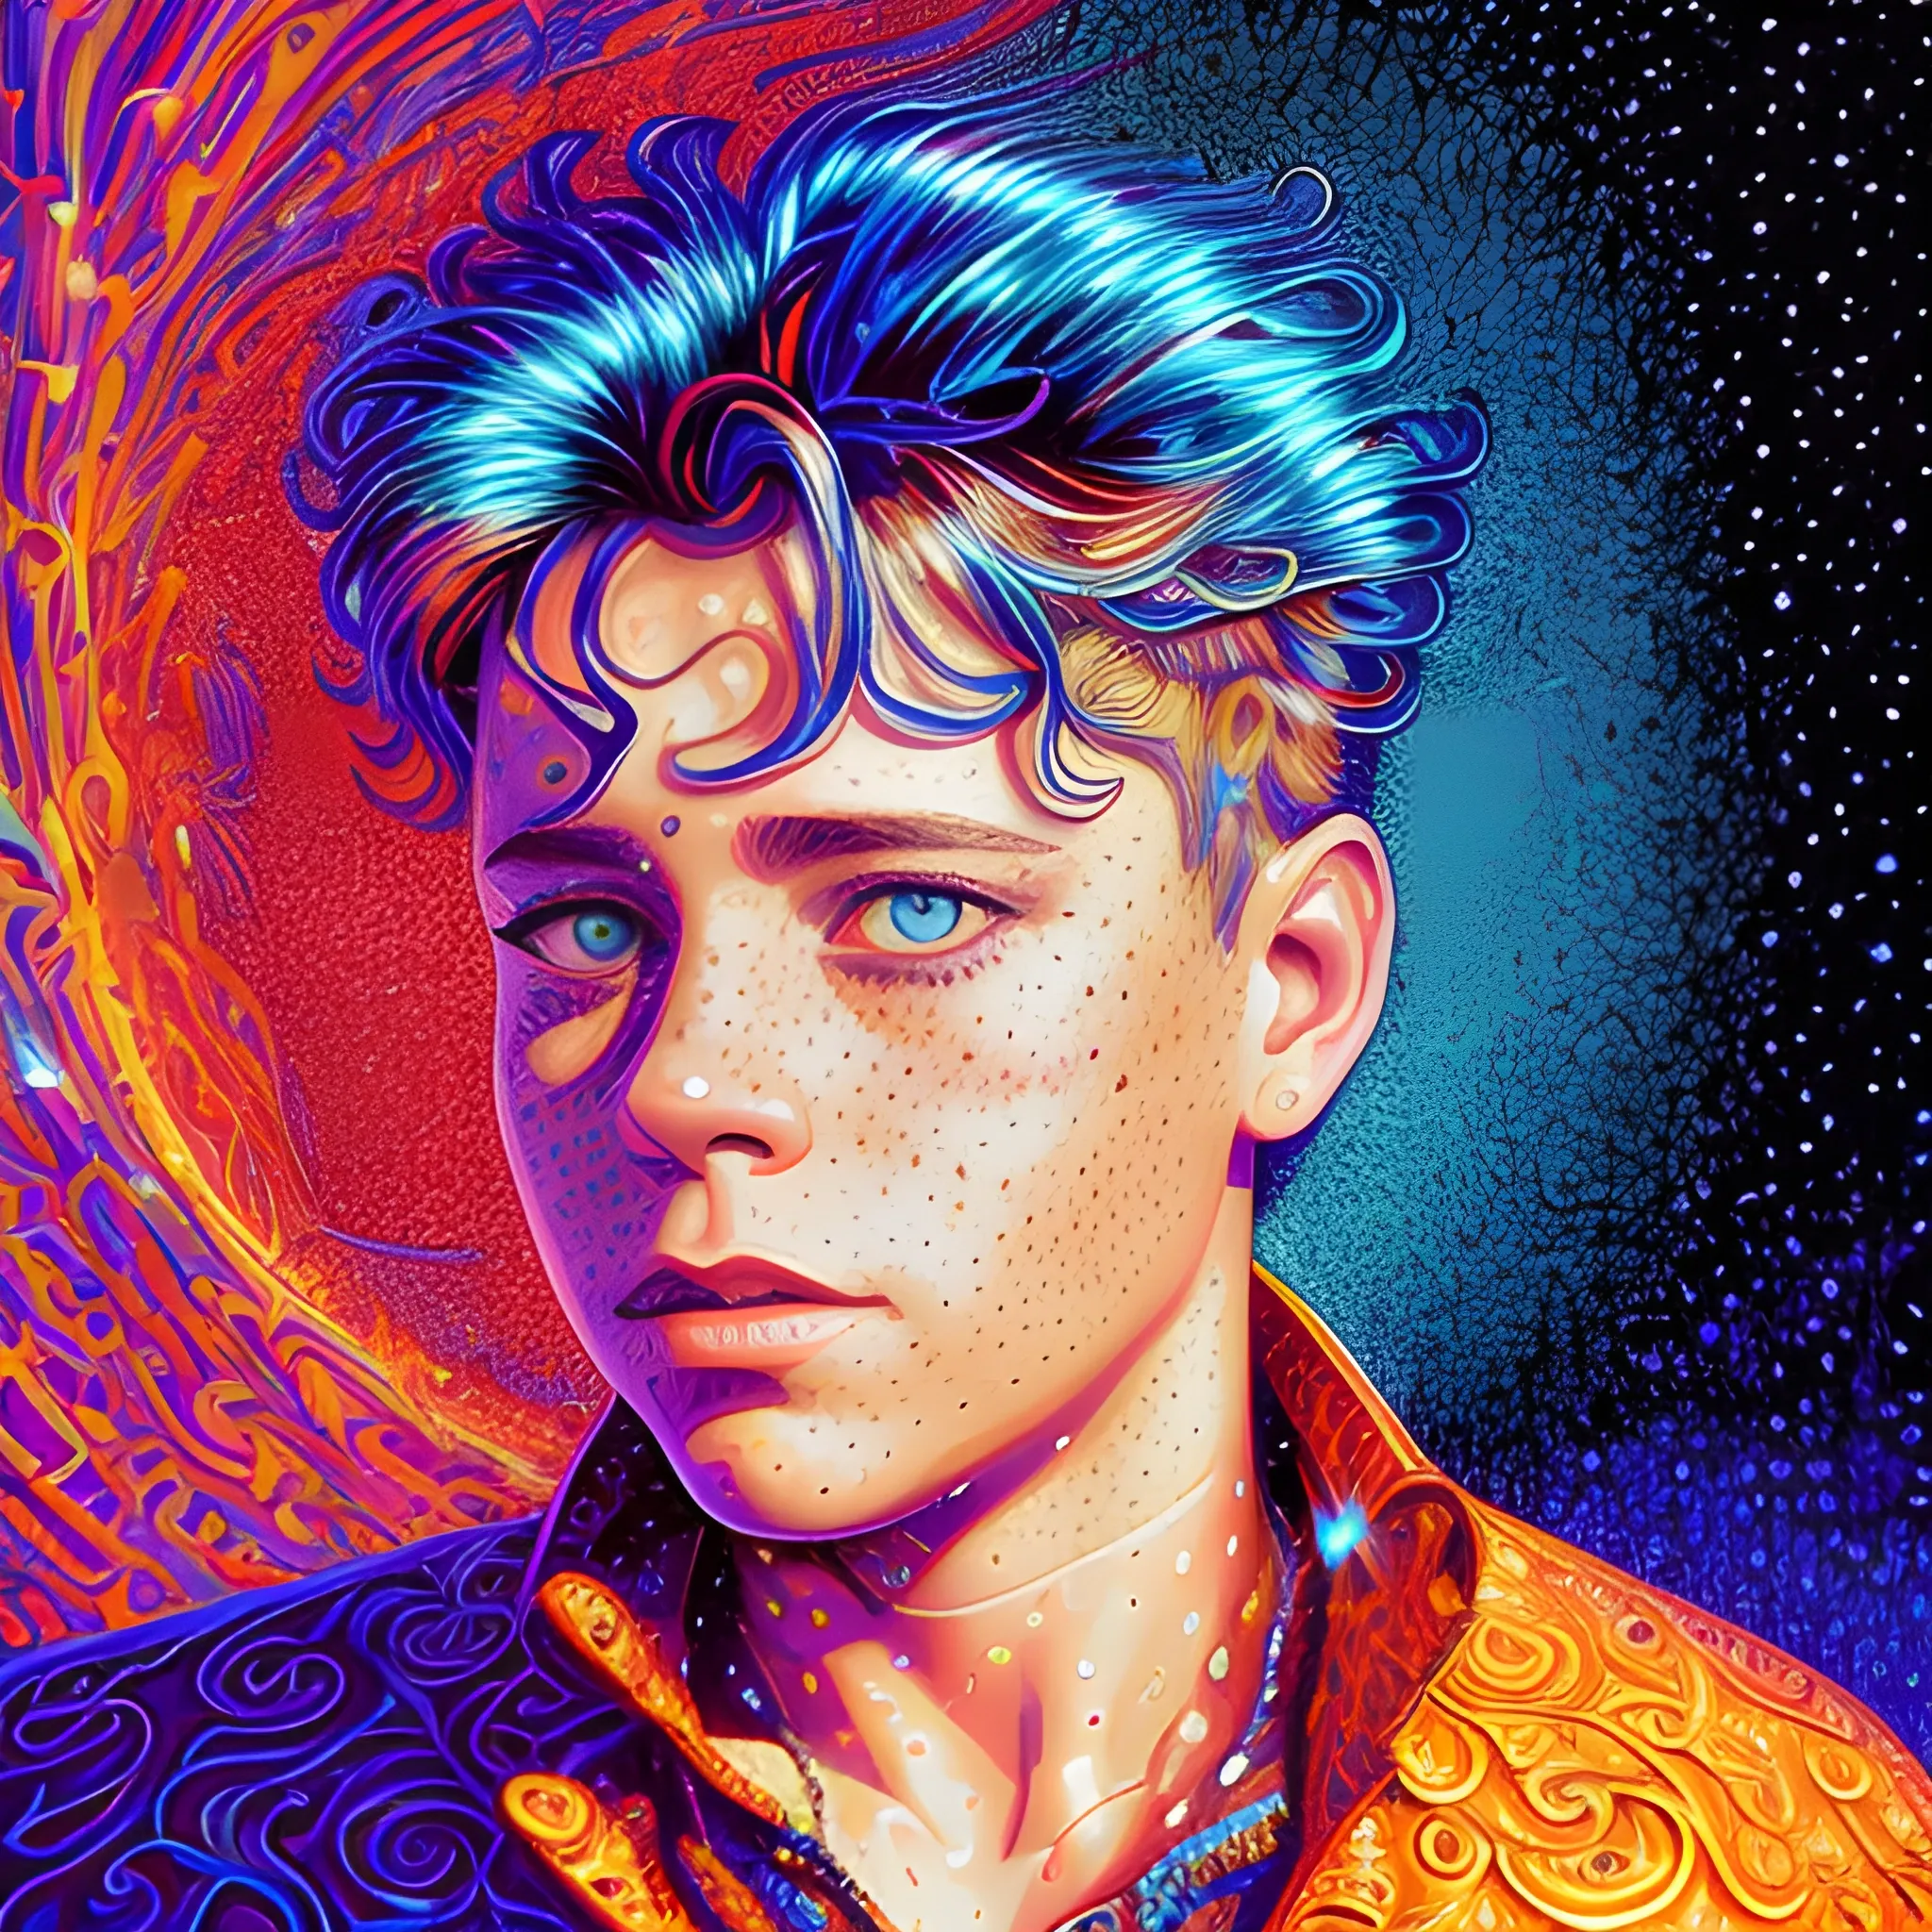 Corey Haim, his long and narrow highly detailed, softly freckled handsome face, blue eyes, meticulously detailed multi-hued hair; by James R. Eads, Fausto-Giurescu, Tania Rivilis, Dan Mumford; luminous colorful sparkles, glitter, airbrush, depth of field, volumetric lighting, rockstar